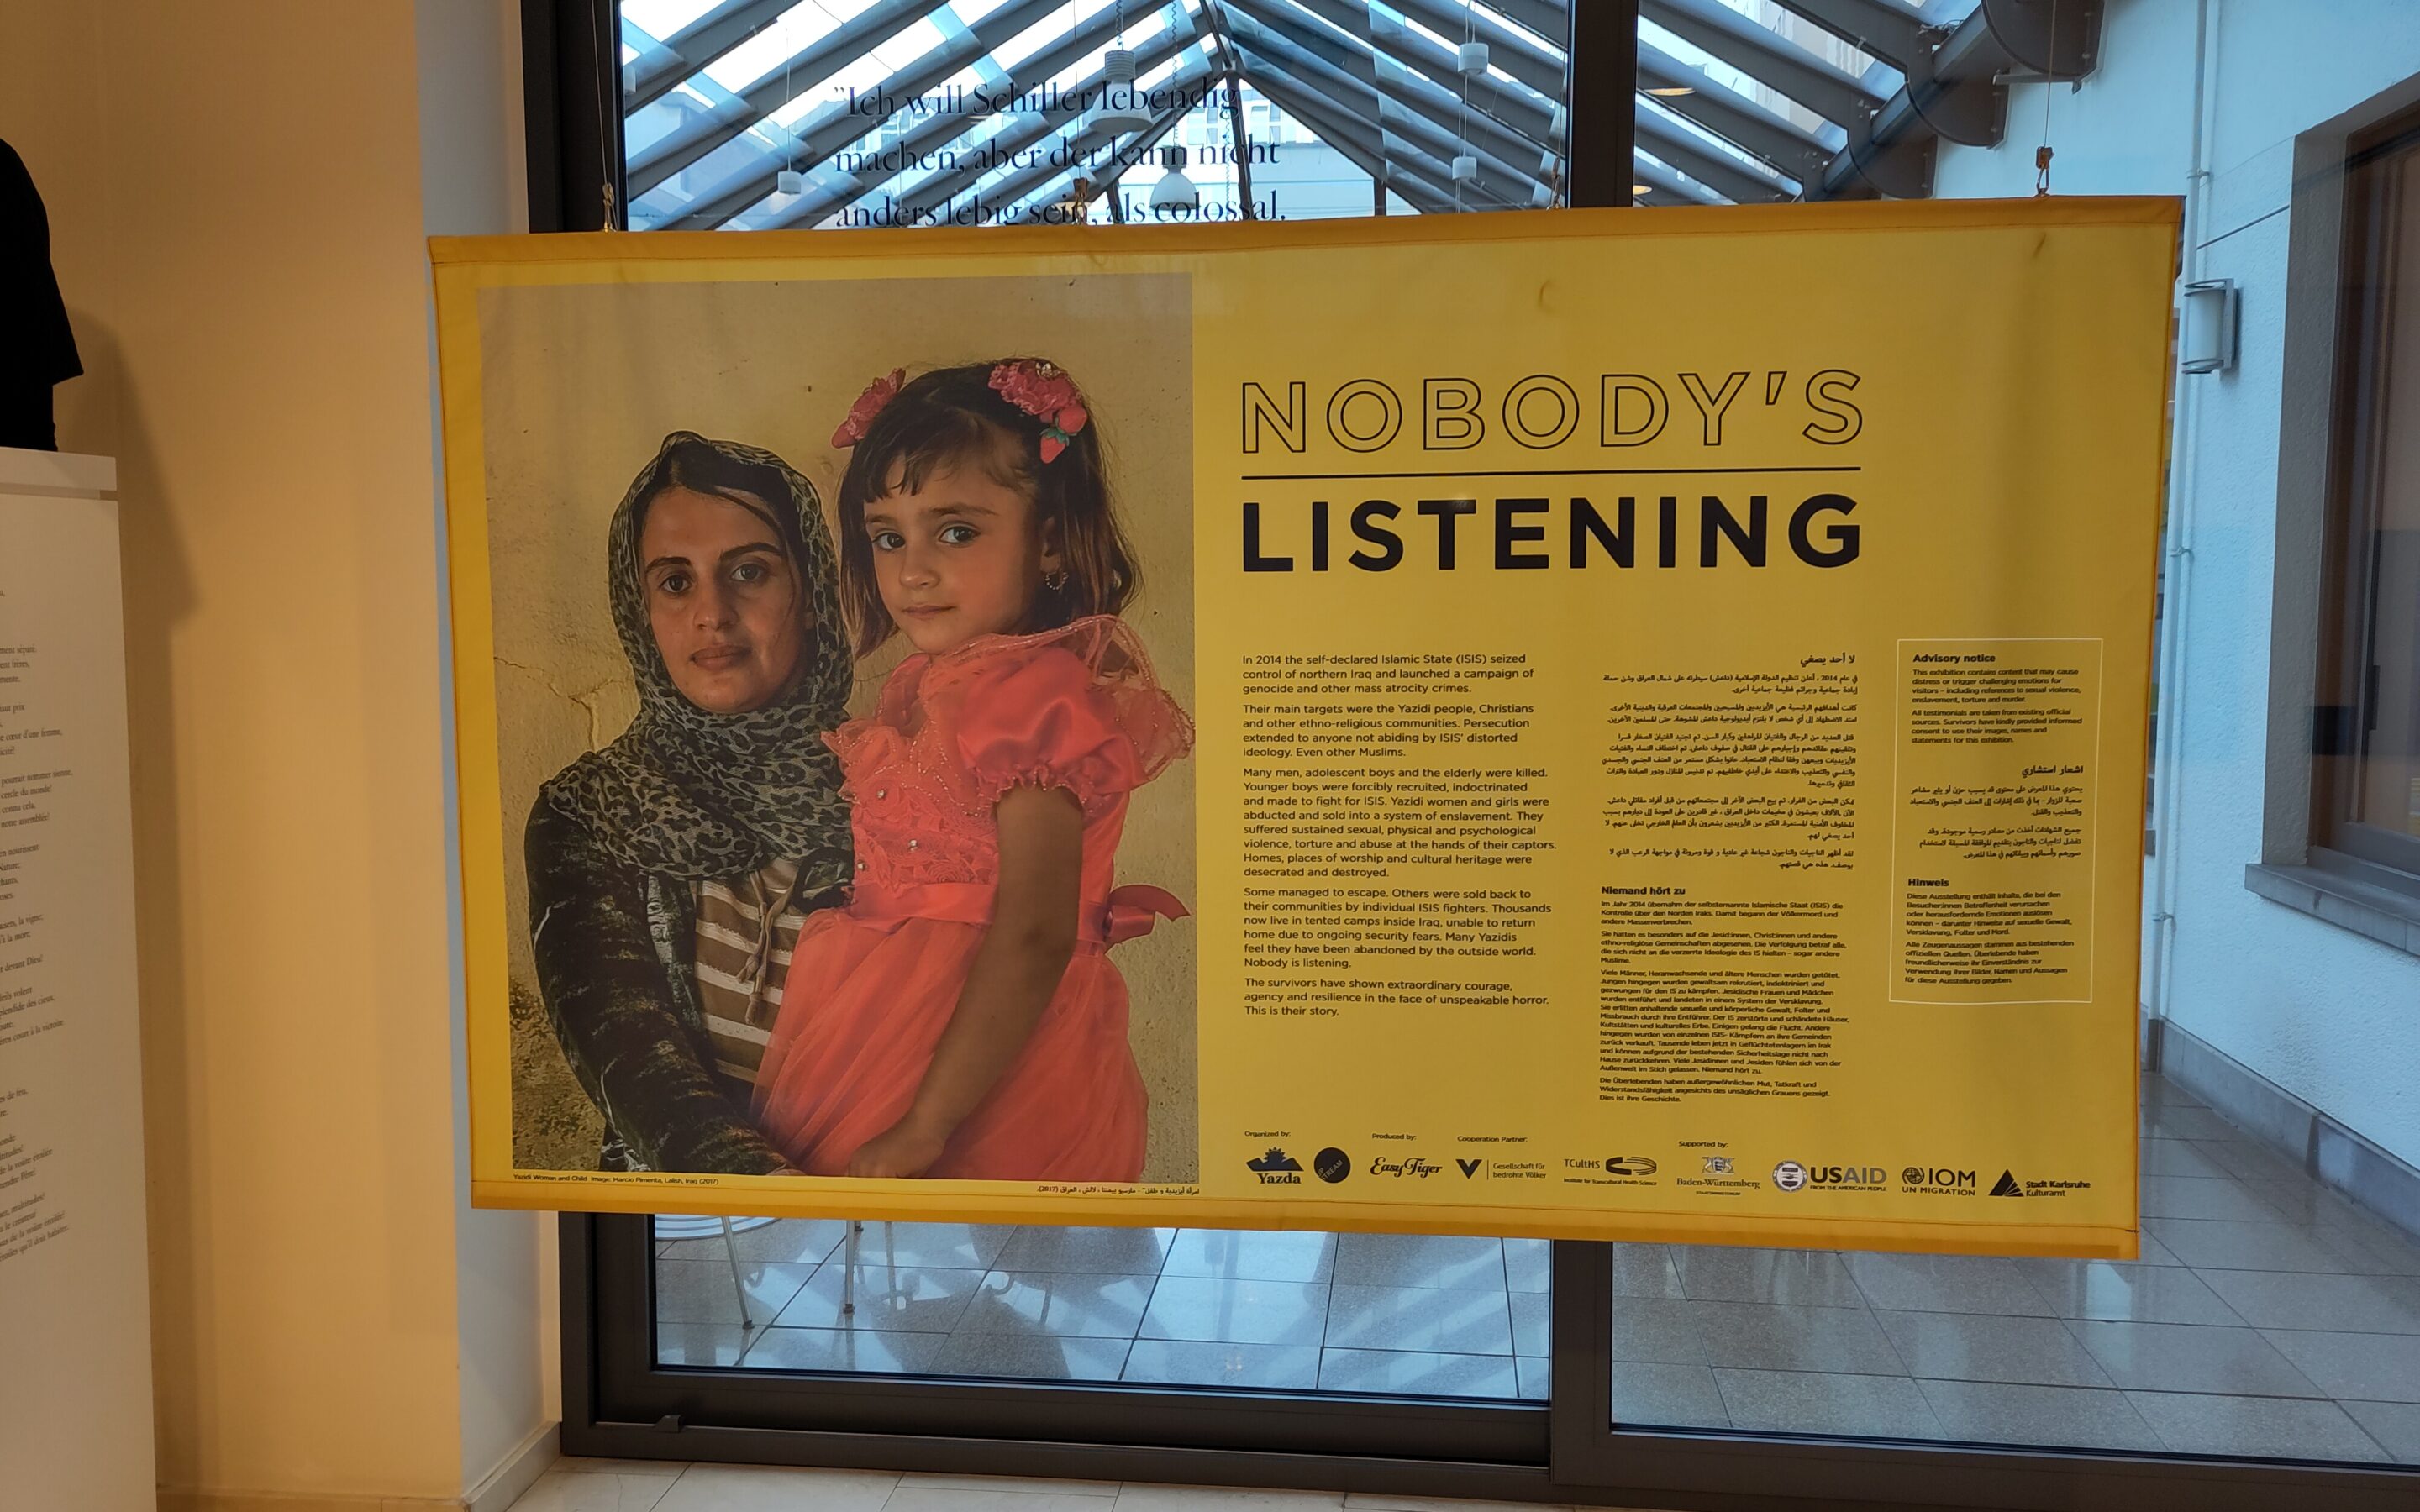 “Nobody’s Listening”, report of a successful exhibition and event